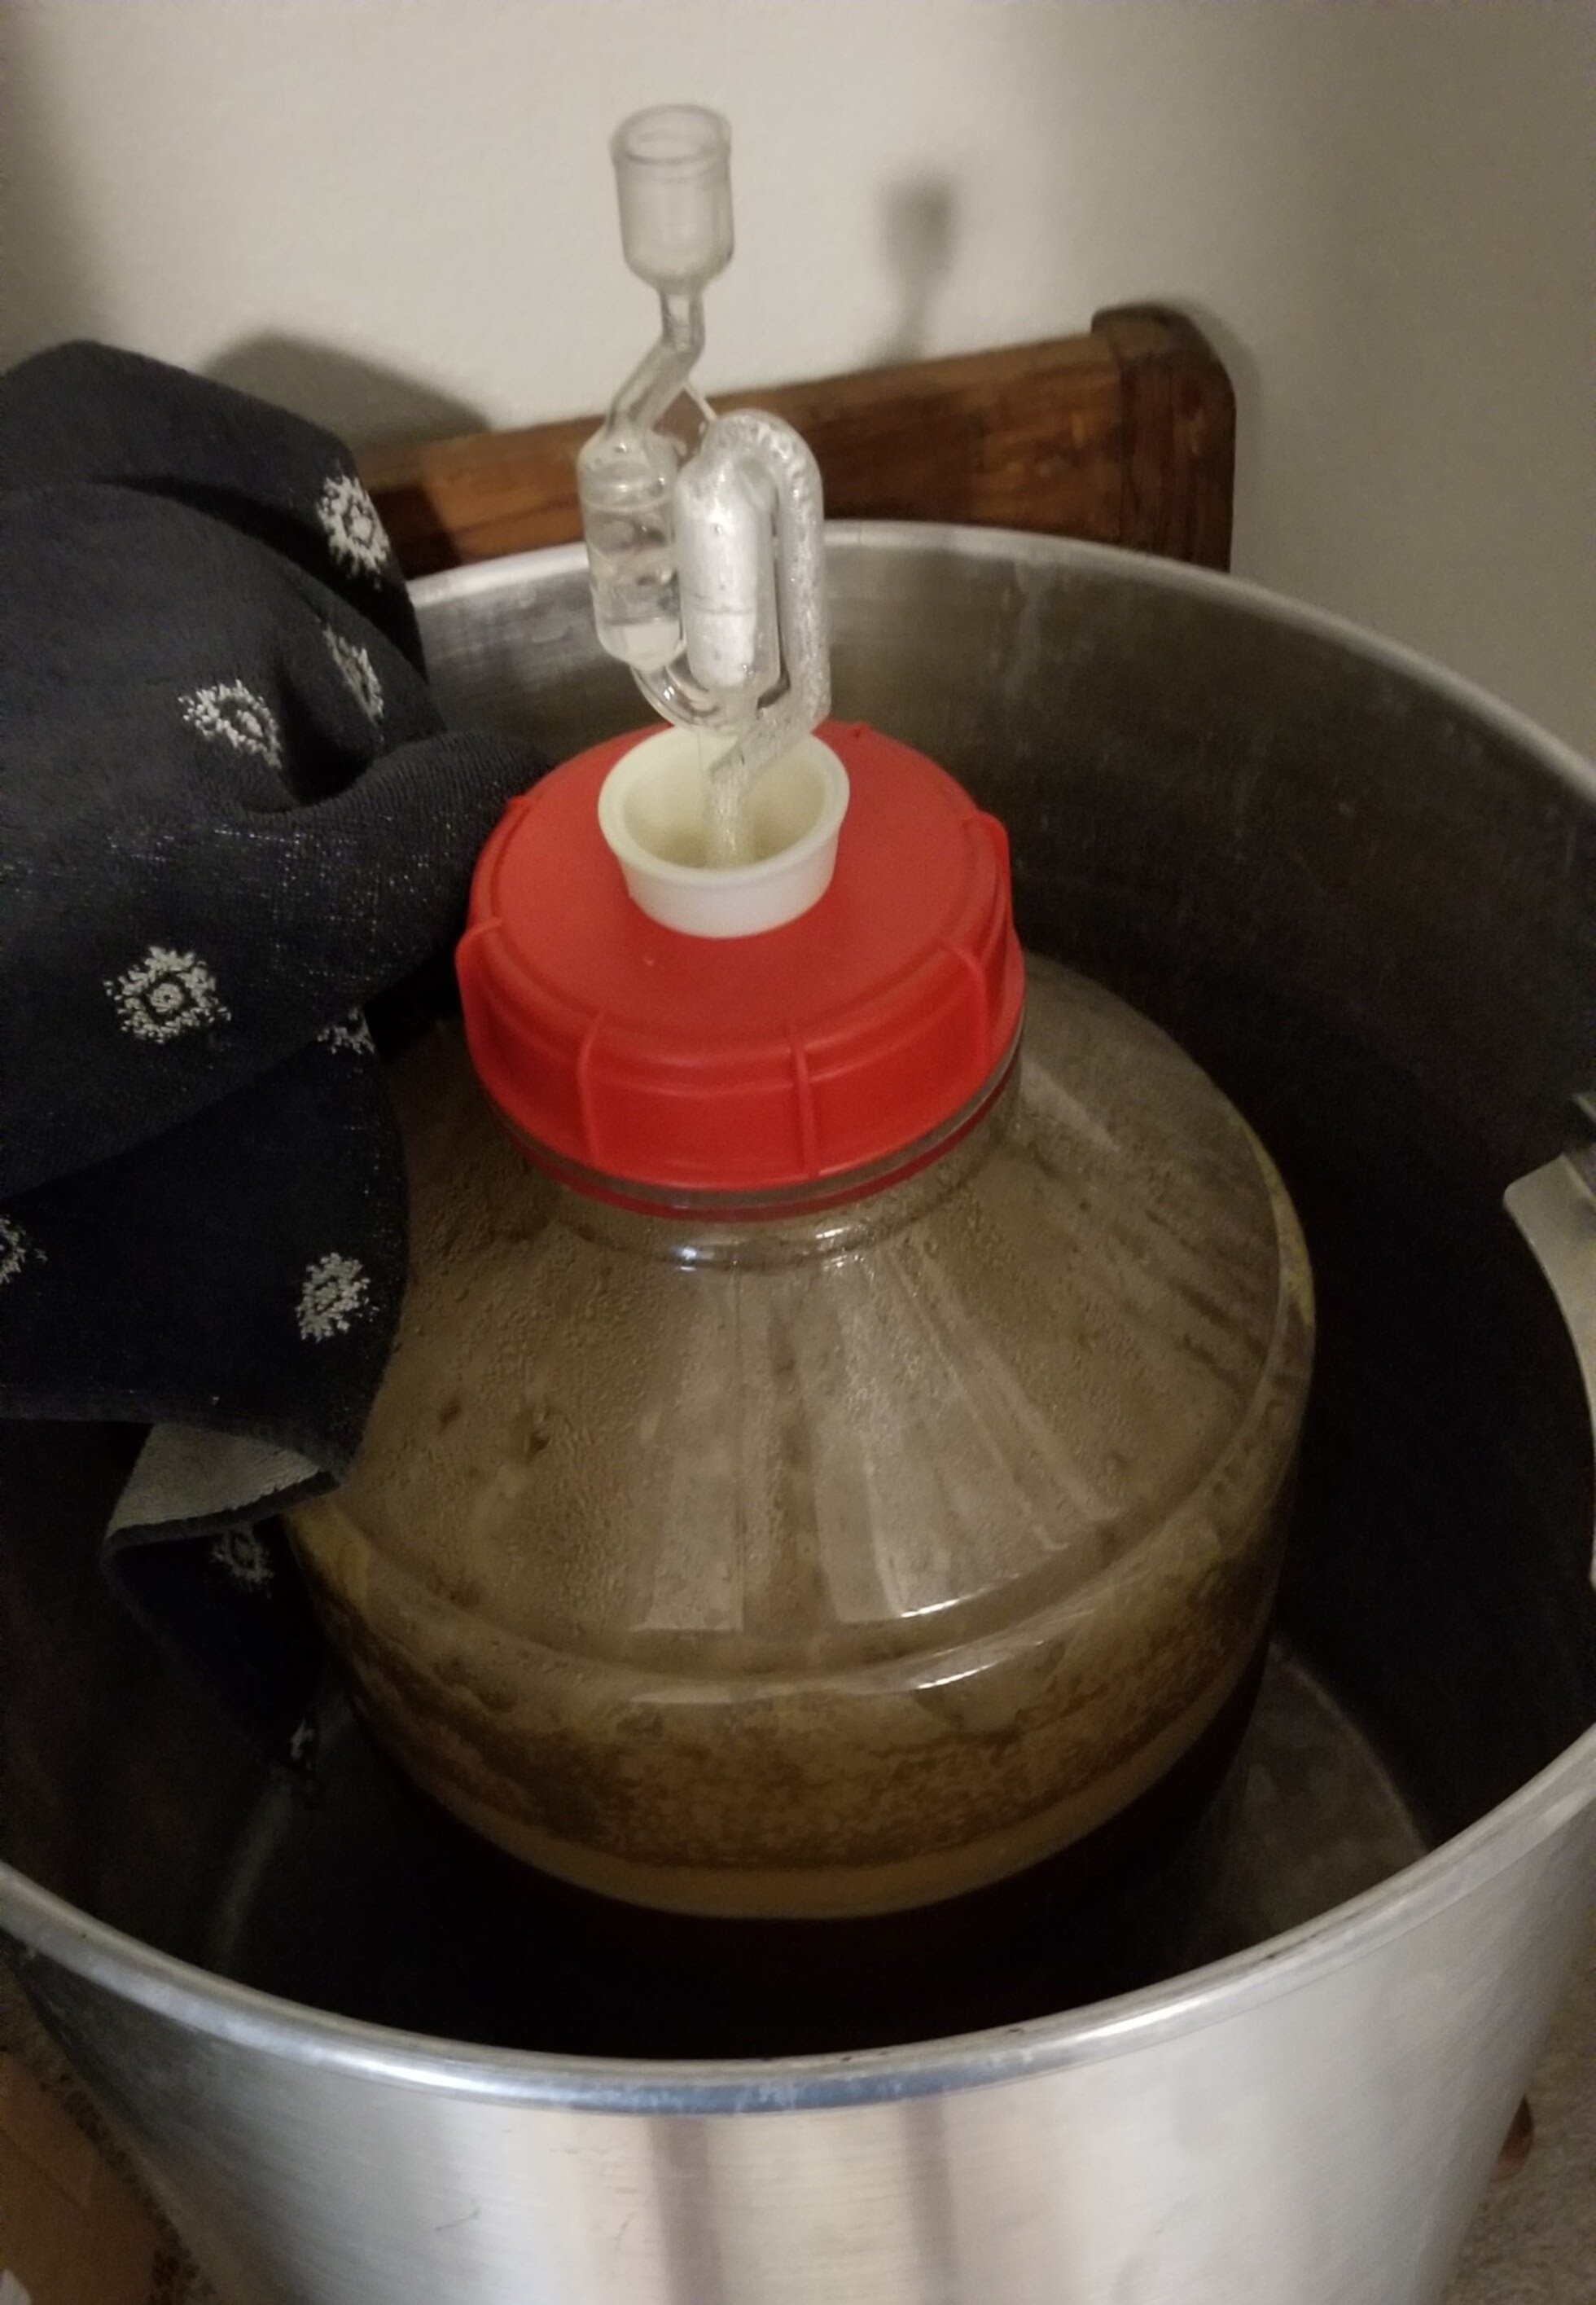 To make sure we didn't have another ferment run over, this one was done in the boil pot with a towel covering it.